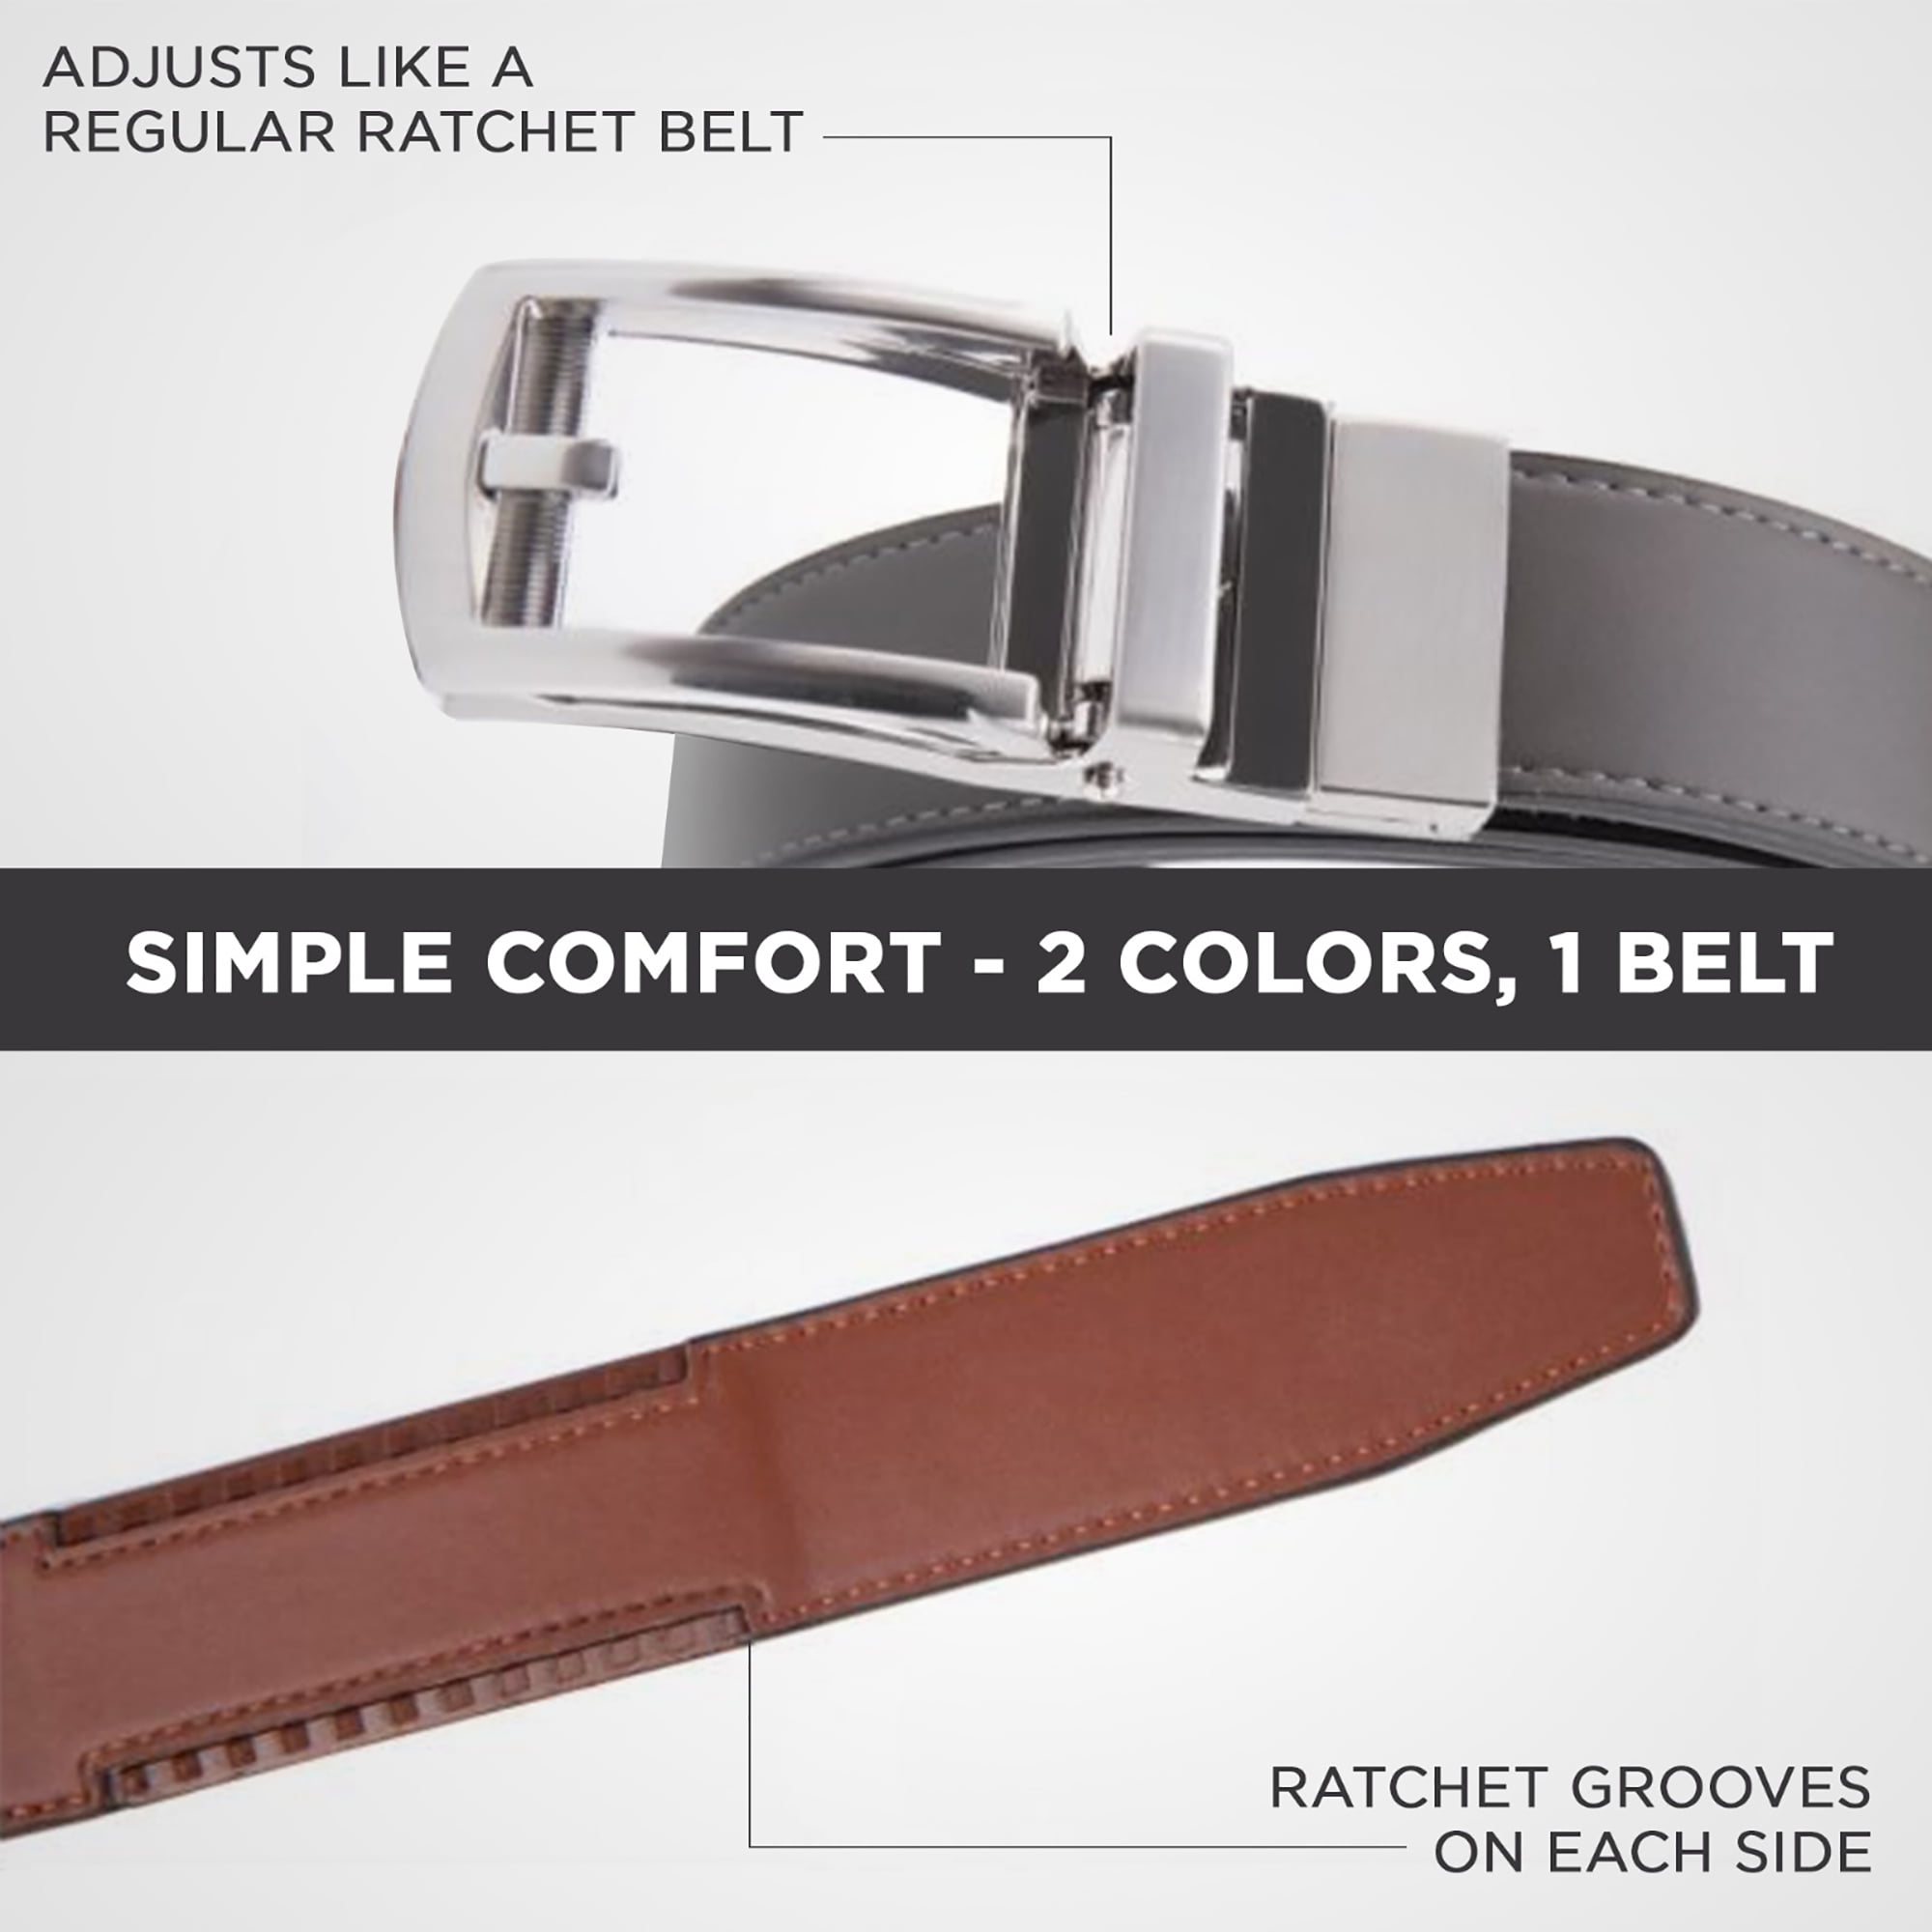 Genuine Leather Up to 51” 1 Belt One Size 2 Colors Patented Reversible Ratchet Belt Adjustable 